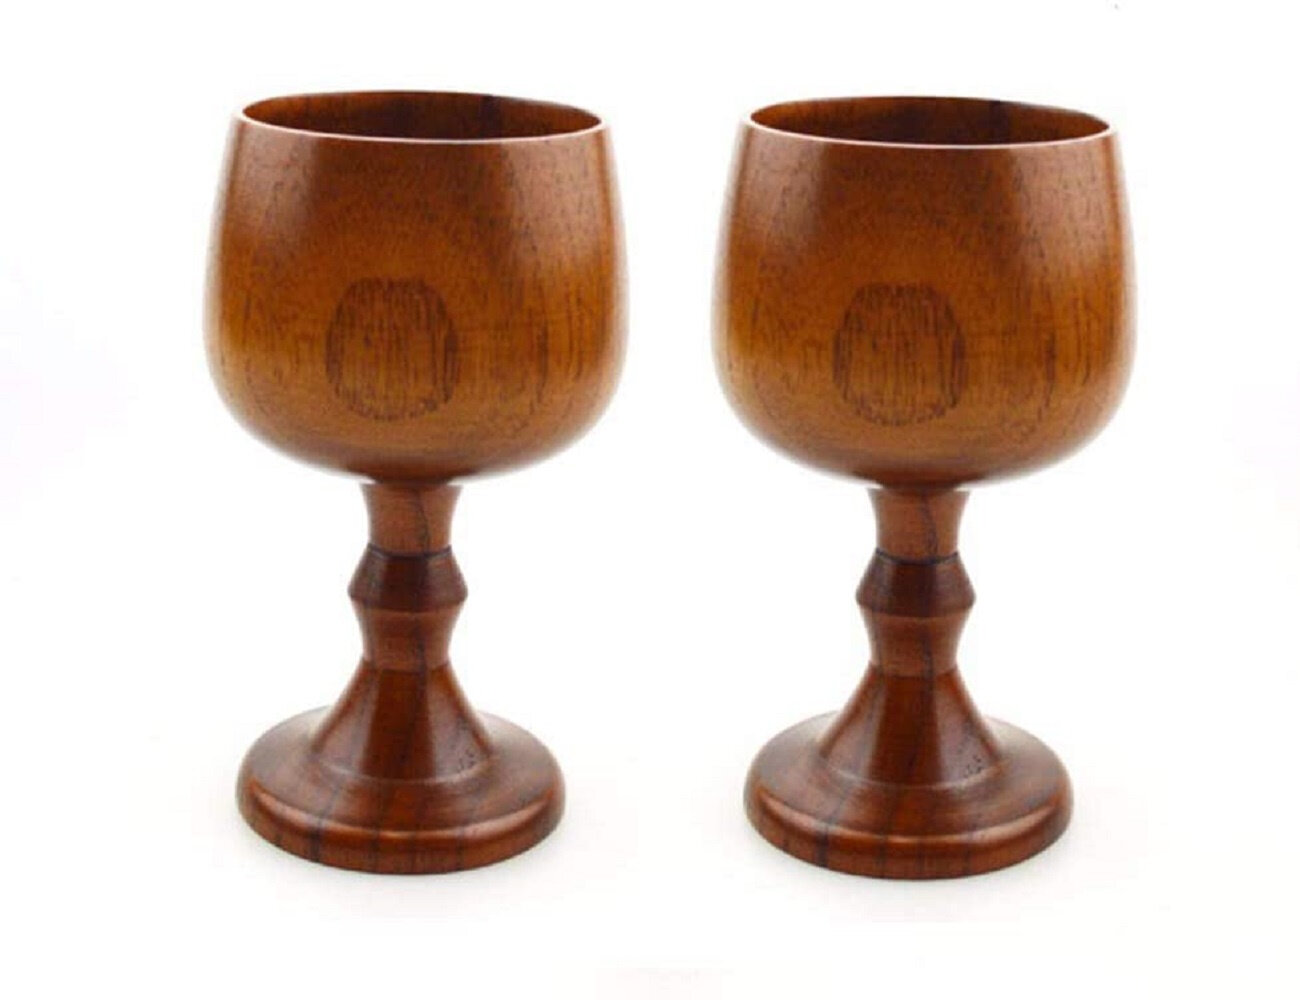 2 Vintage Jujube Wooden Wine Goblet Drinking Cup Water Chalice Glass Heat proof